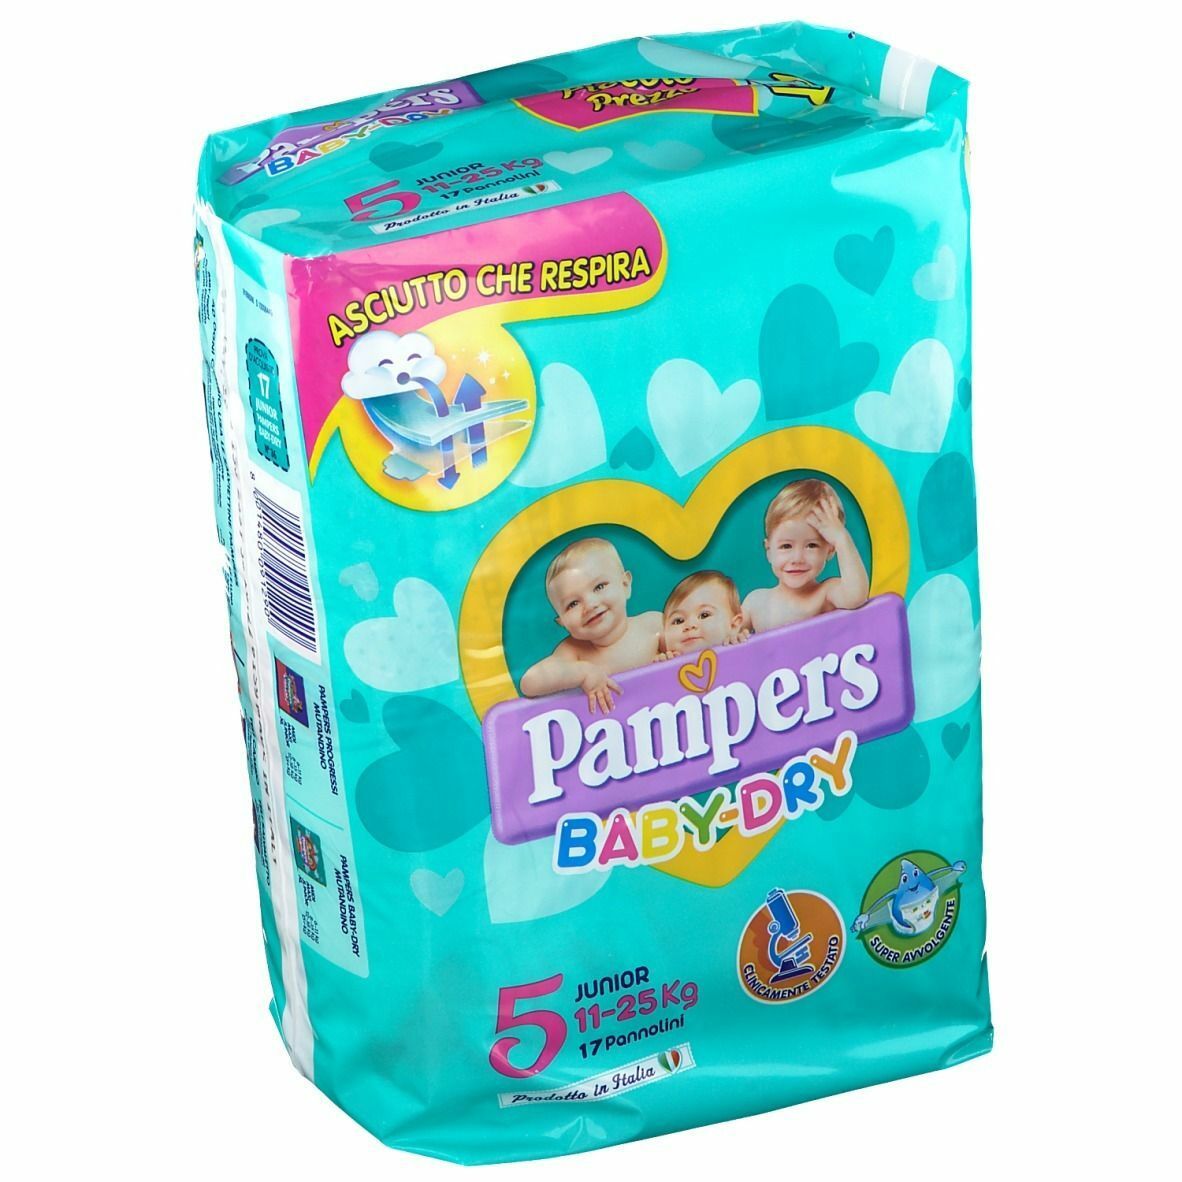 FATER SpA Pampers Baby Dry Junior Gr. 5